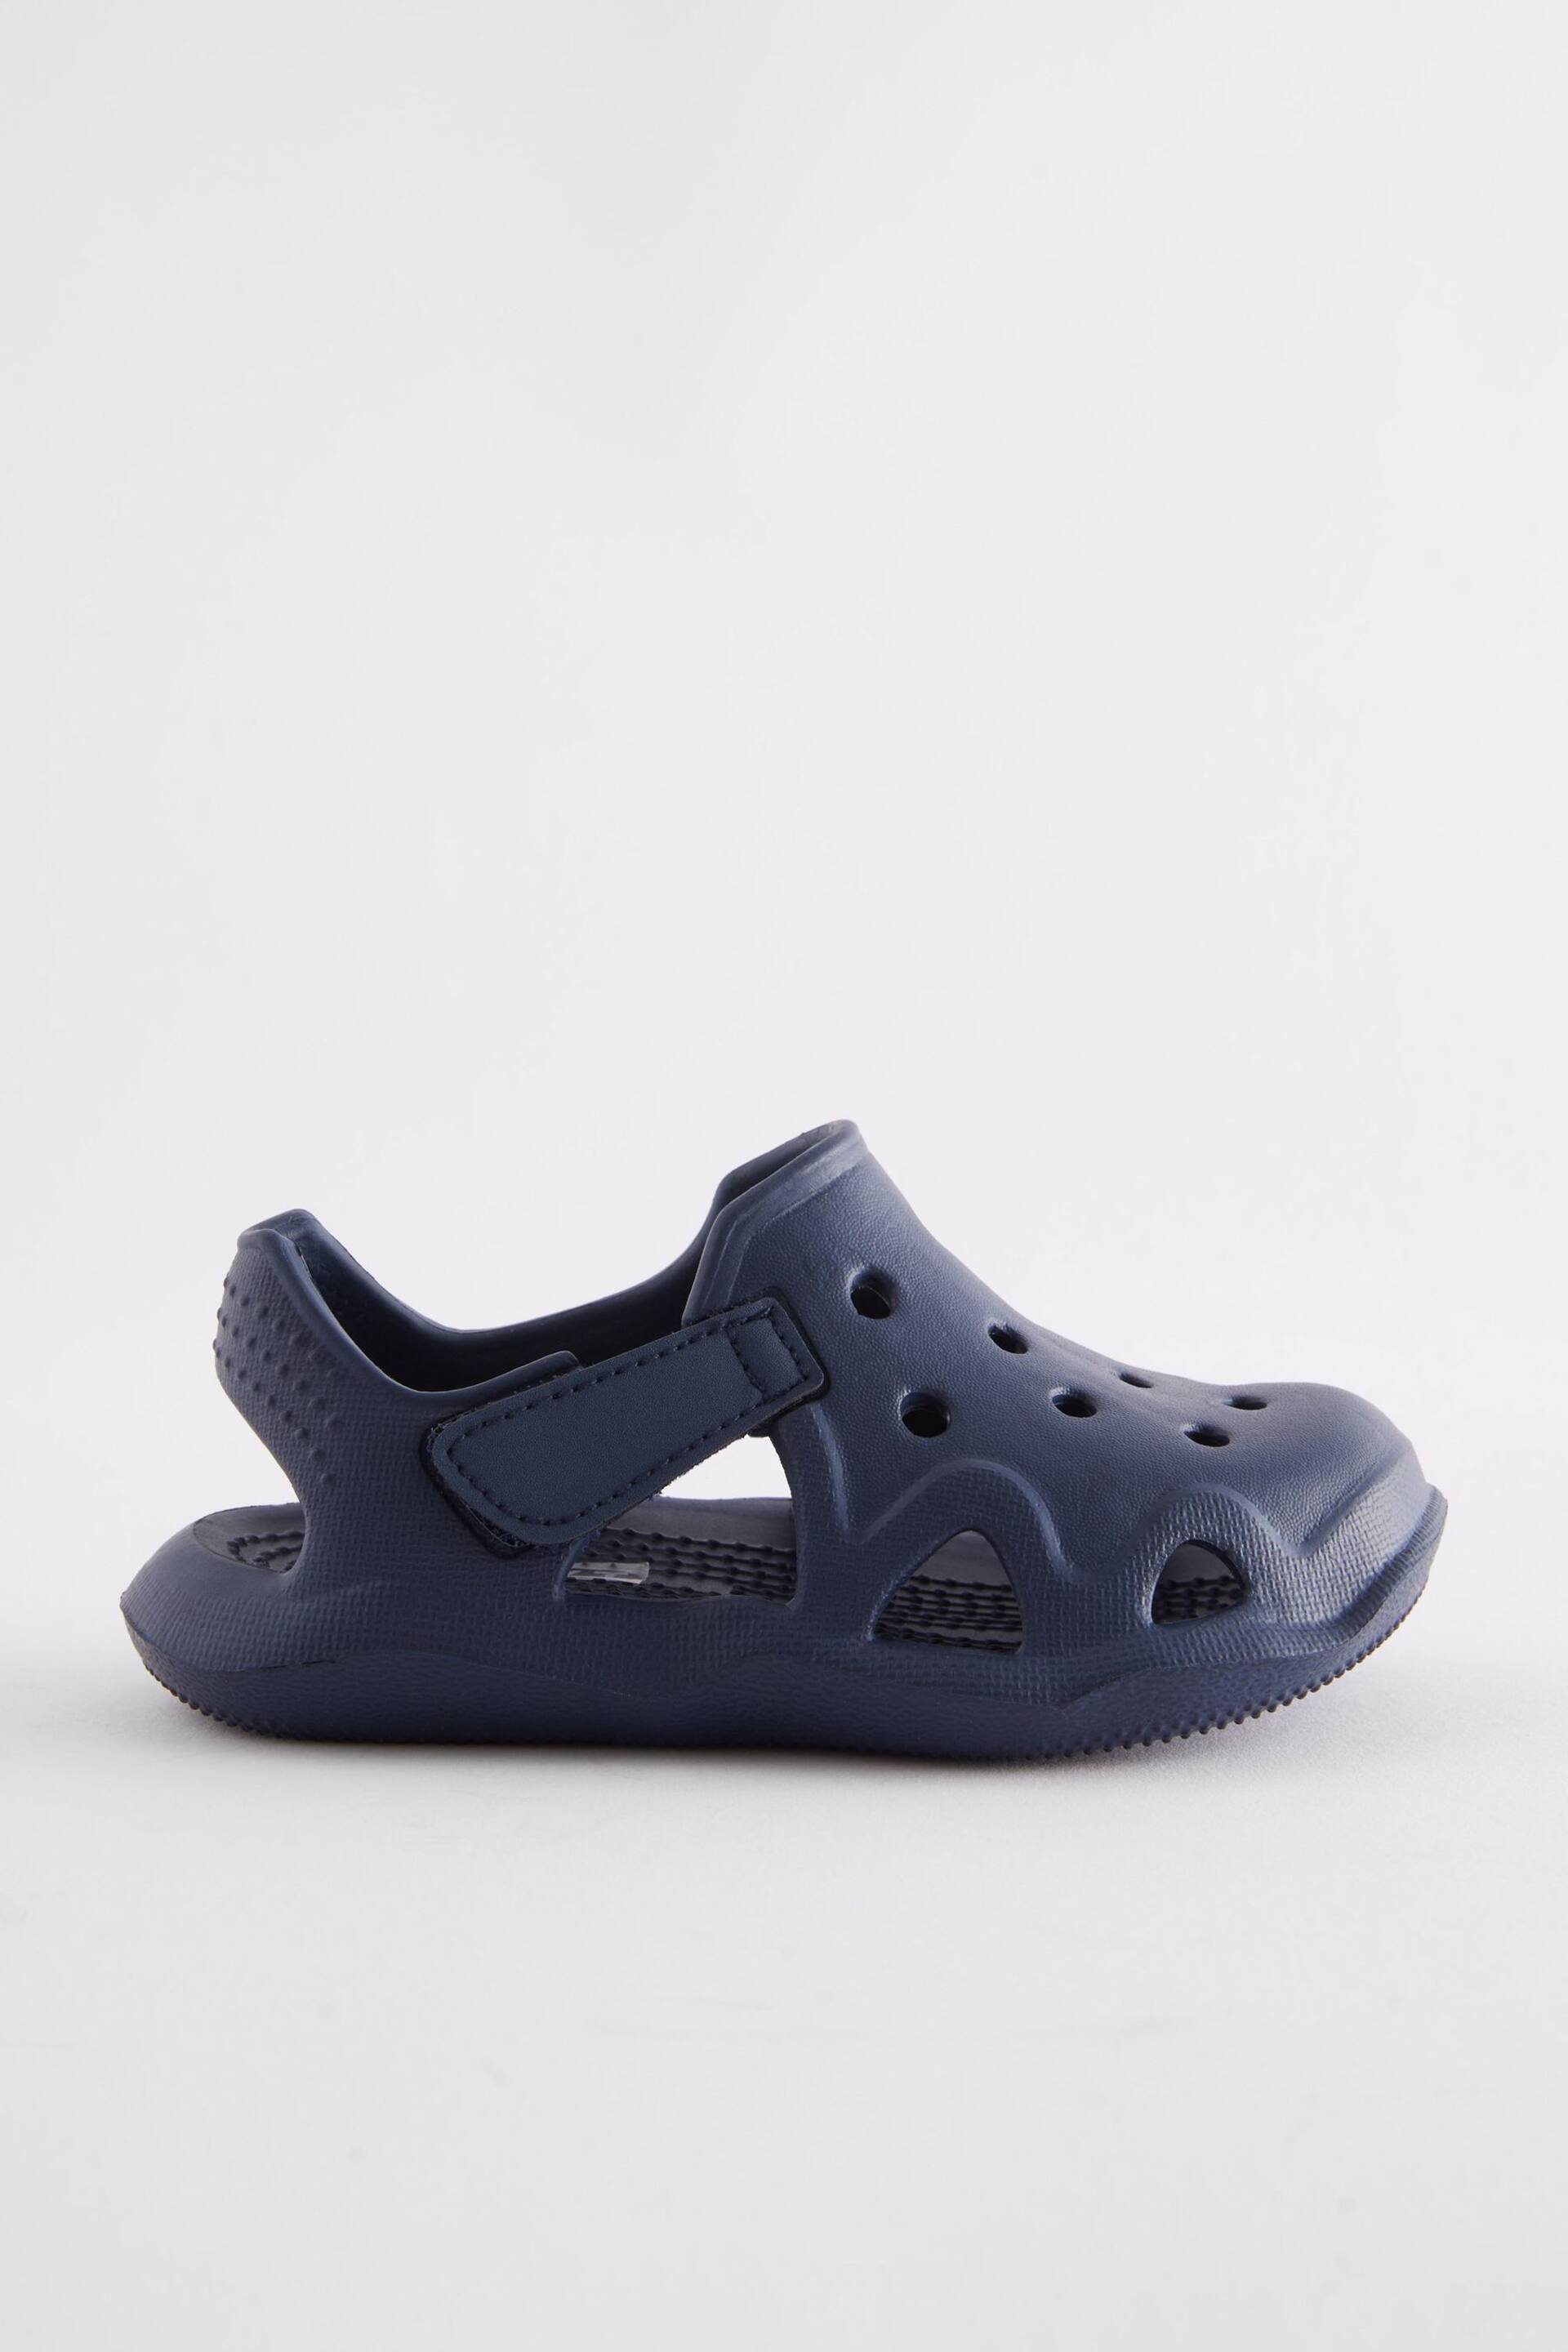 Navy Moulded Closed Toe Clogs - Image 3 of 7